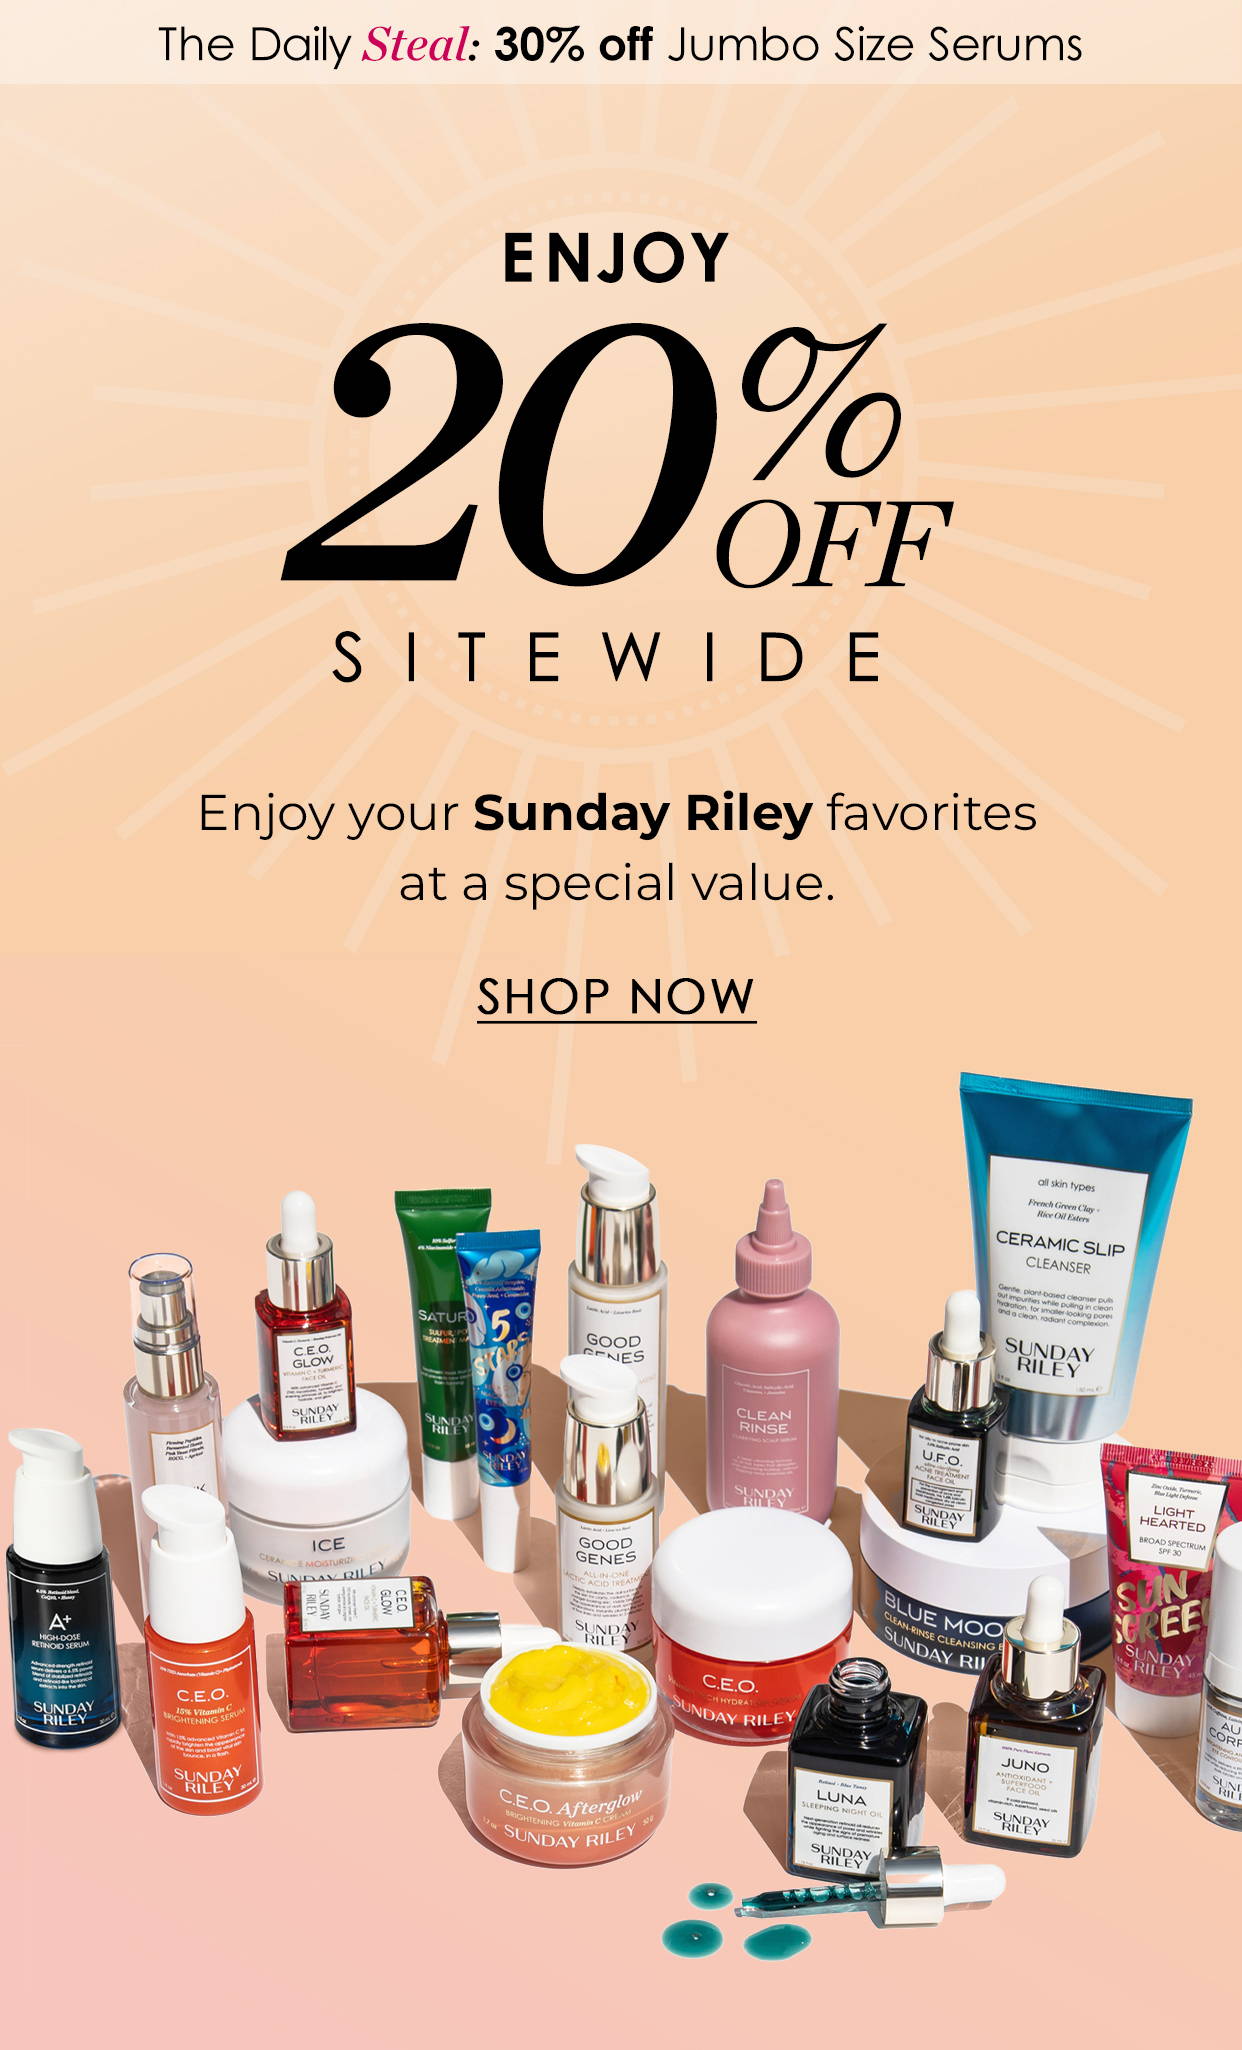 Black Friday 20% off site wide - Daily Deal: 30% off Jumbo Size Serums